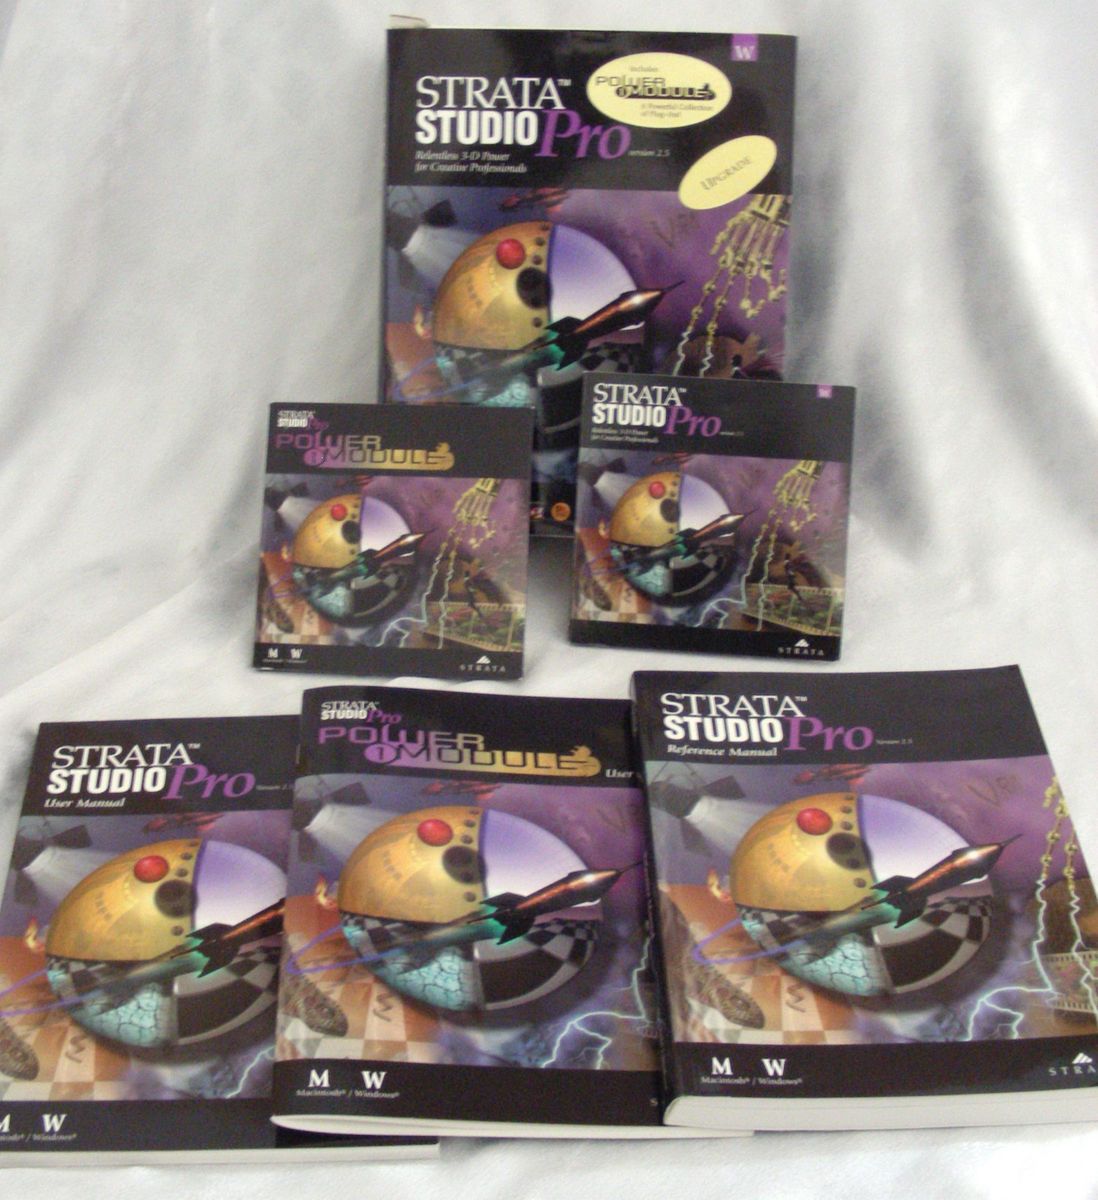   Studio Pro 2 5 3D Modeling Animation Software  in Box